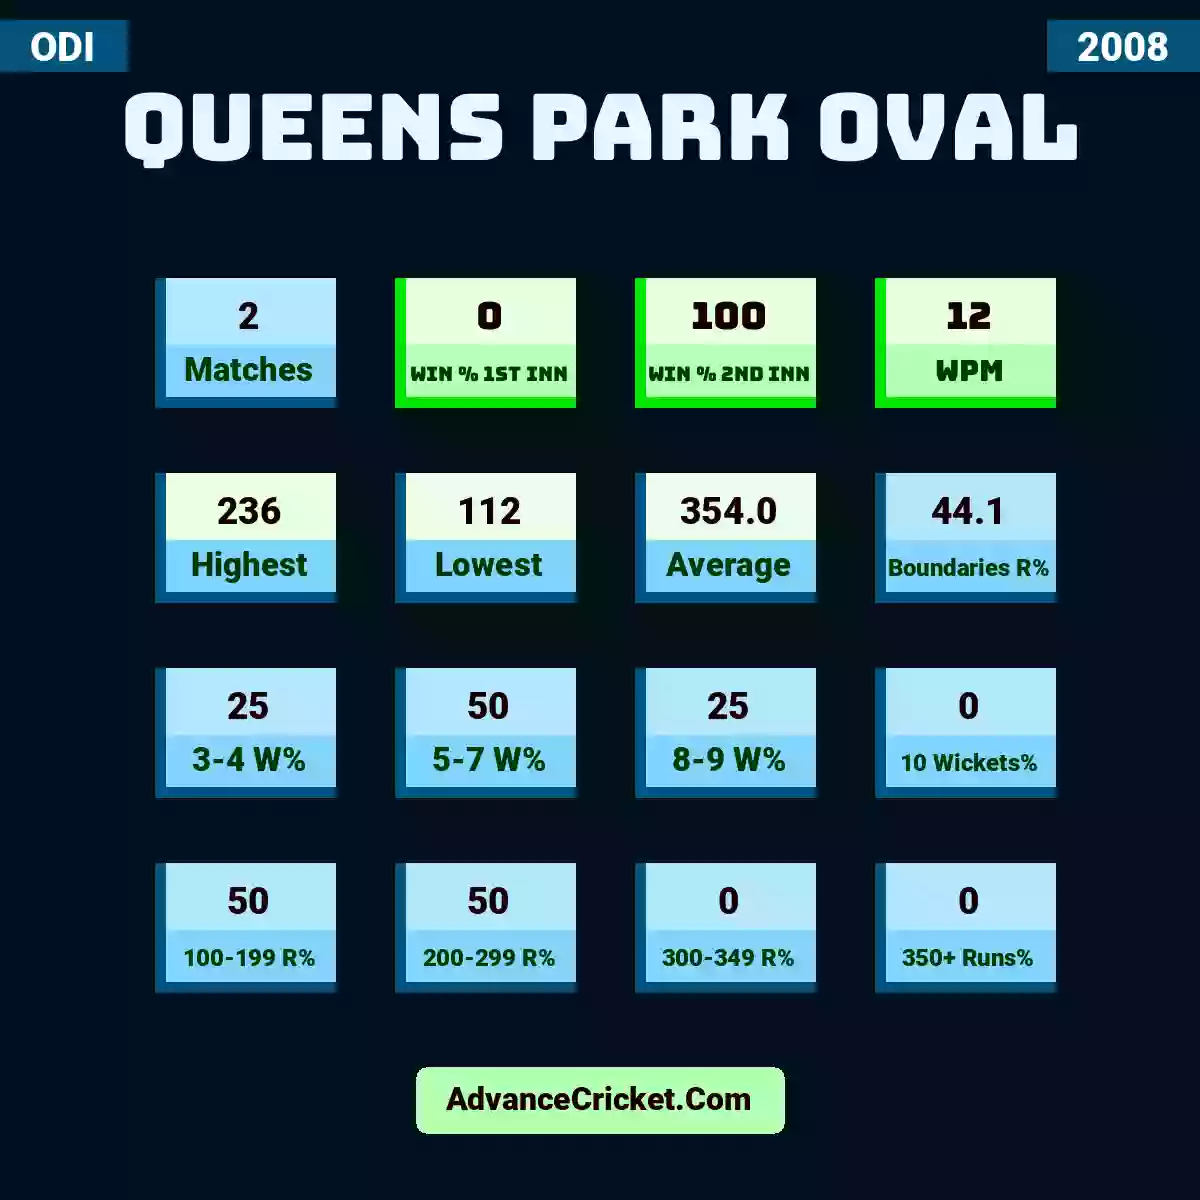 Image showing Queens Park Oval with Matches: 2, Win % 1st Inn: 0, Win % 2nd Inn: 100, WPM: 12, Highest: 236, Lowest: 112, Average: 354.0, Boundaries R%: 44.1, 3-4 W%: 25, 5-7 W%: 50, 8-9 W%: 25, 10 Wickets%: 0, 100-199 R%: 50, 200-299 R%: 50, 300-349 R%: 0, 350+ Runs%: 0.